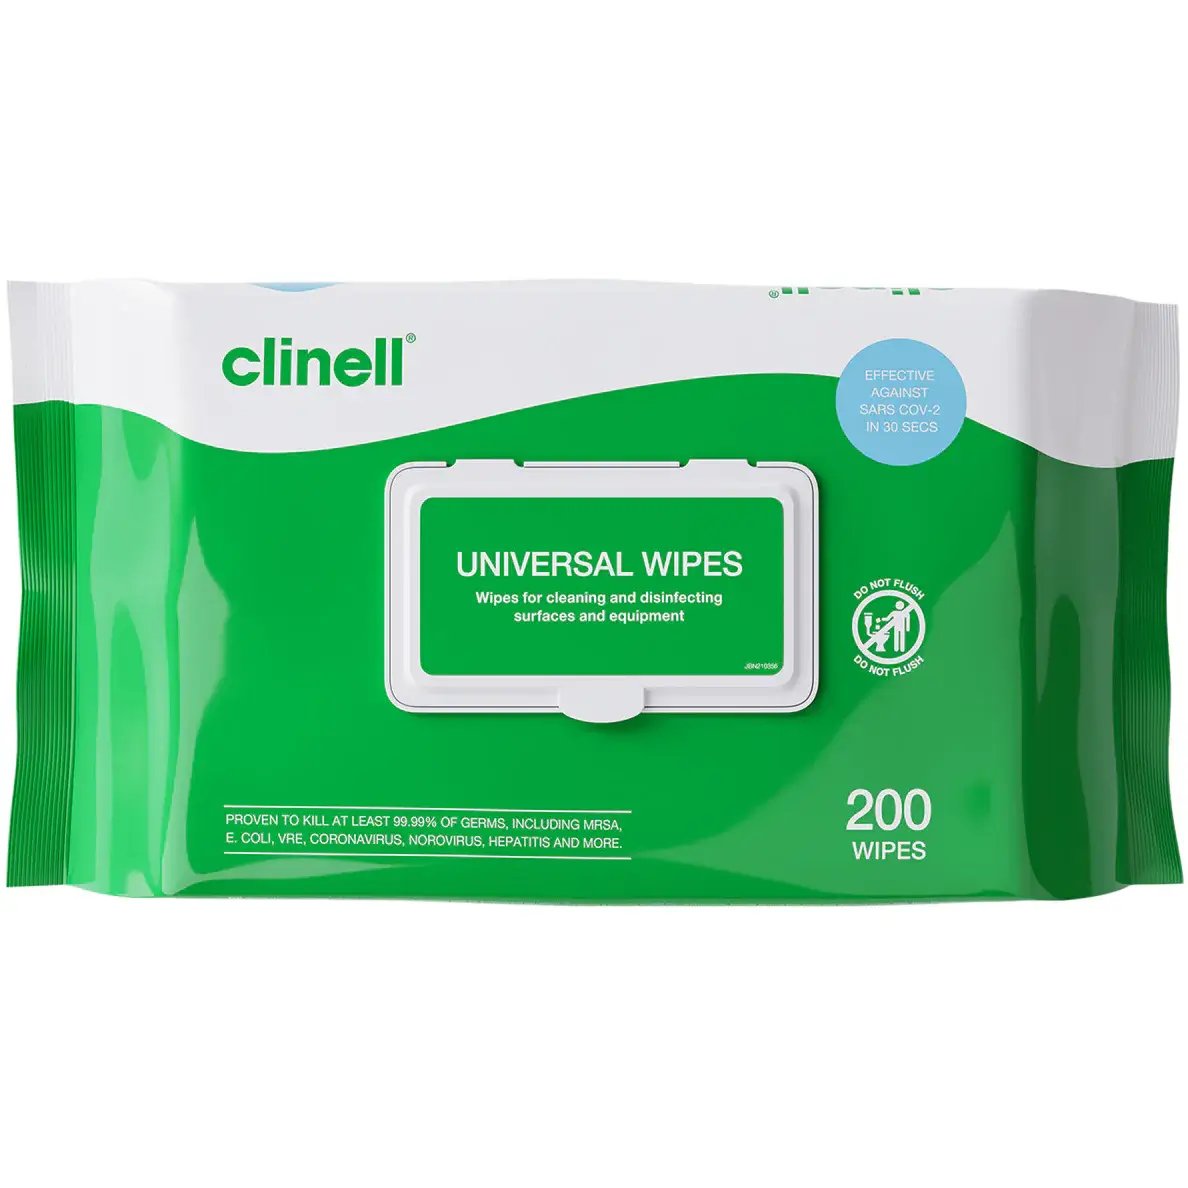 clinell universal wipes